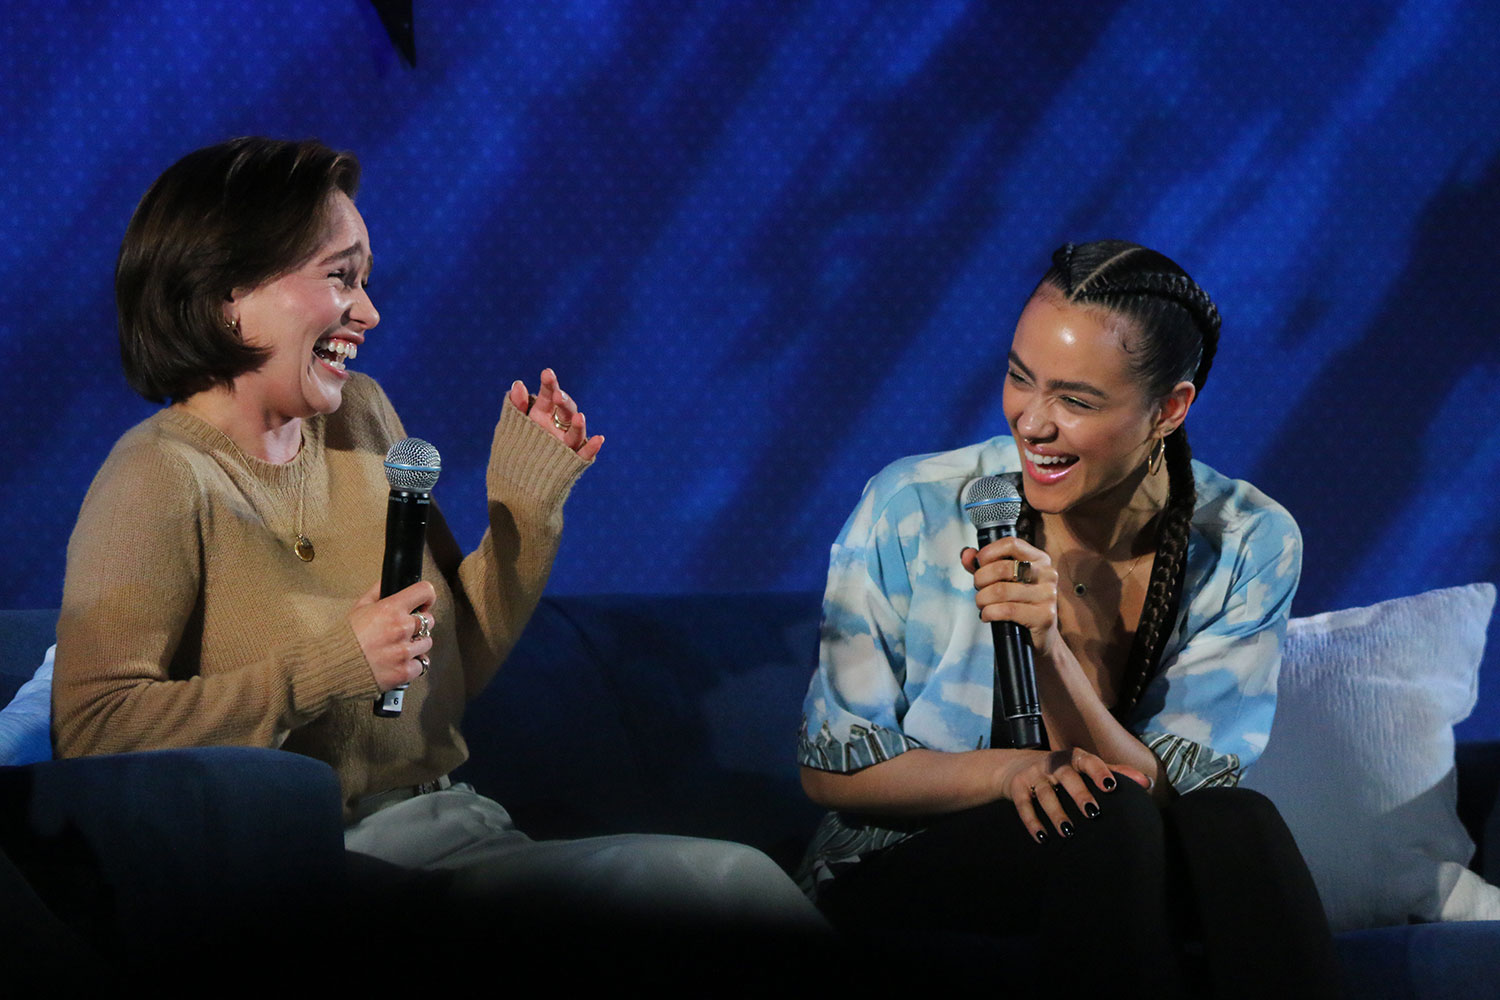 PHOTO: "Game of Thrones" actresses Emilia Clarke and Nathalie Emmanuel were celebrity guests at Comicpalooza 2019. Photo by The Signal Editor-in-Chief Brandon Peña.